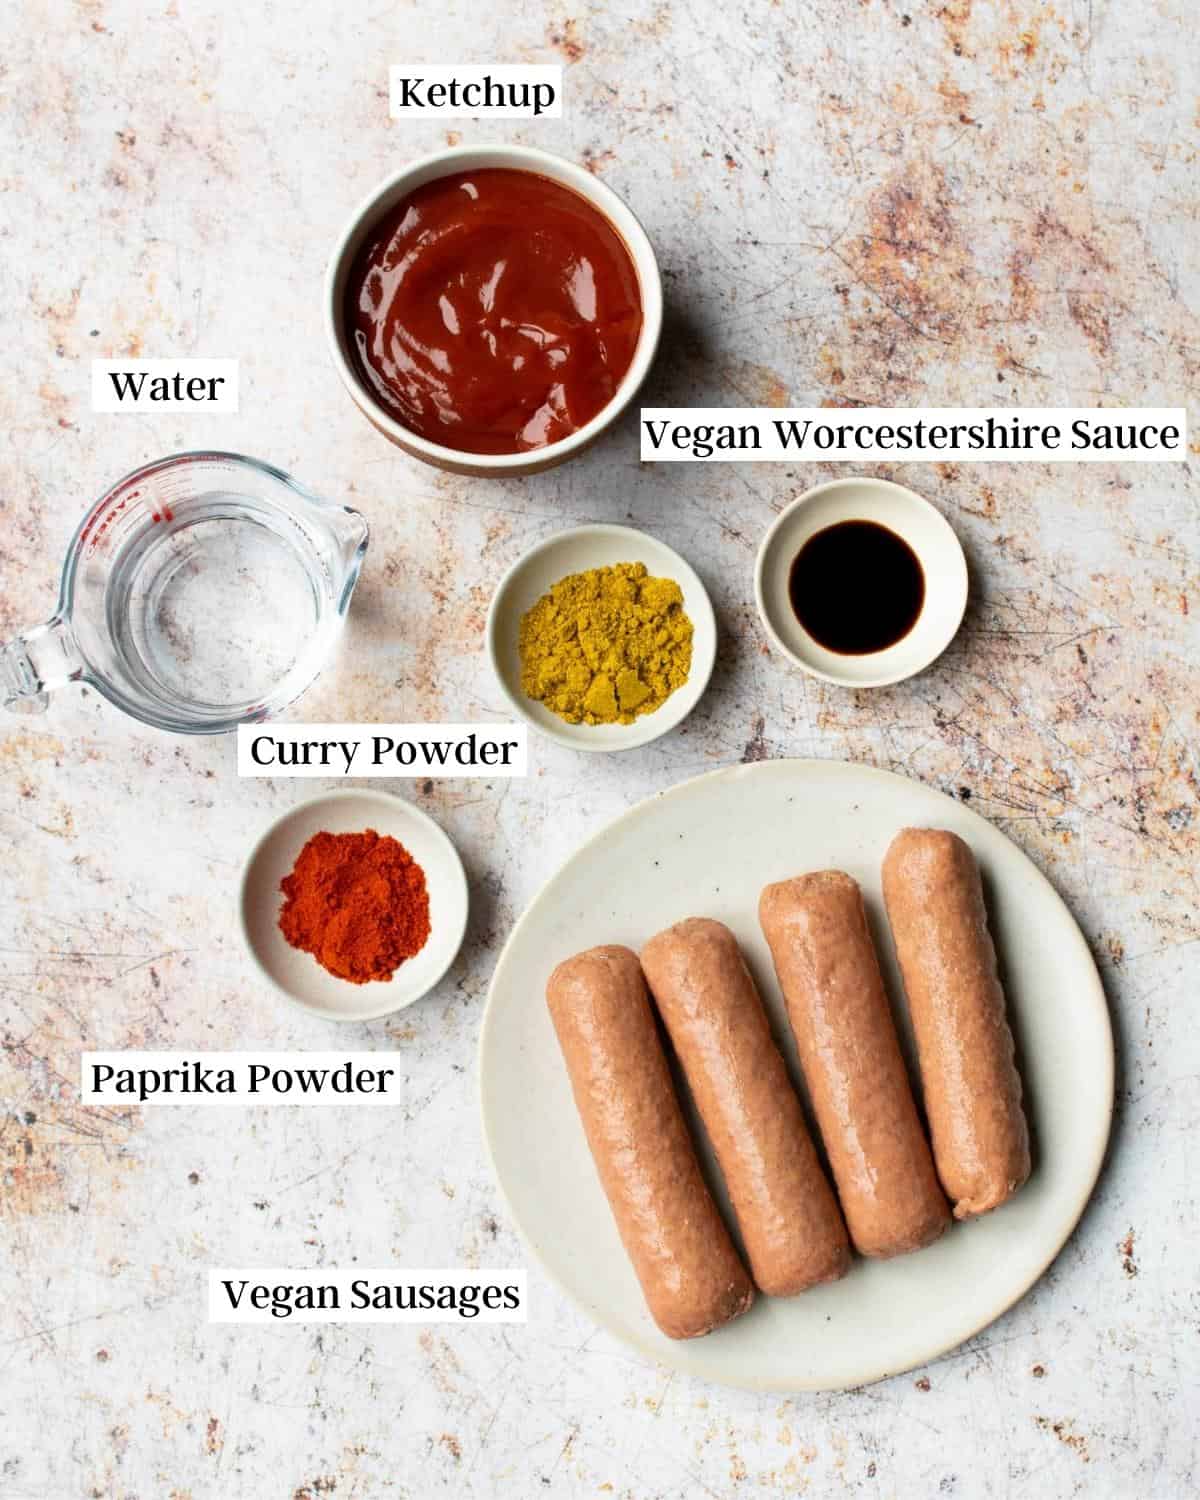 Vegan currywurst ingredients laid out on plates and bowls.